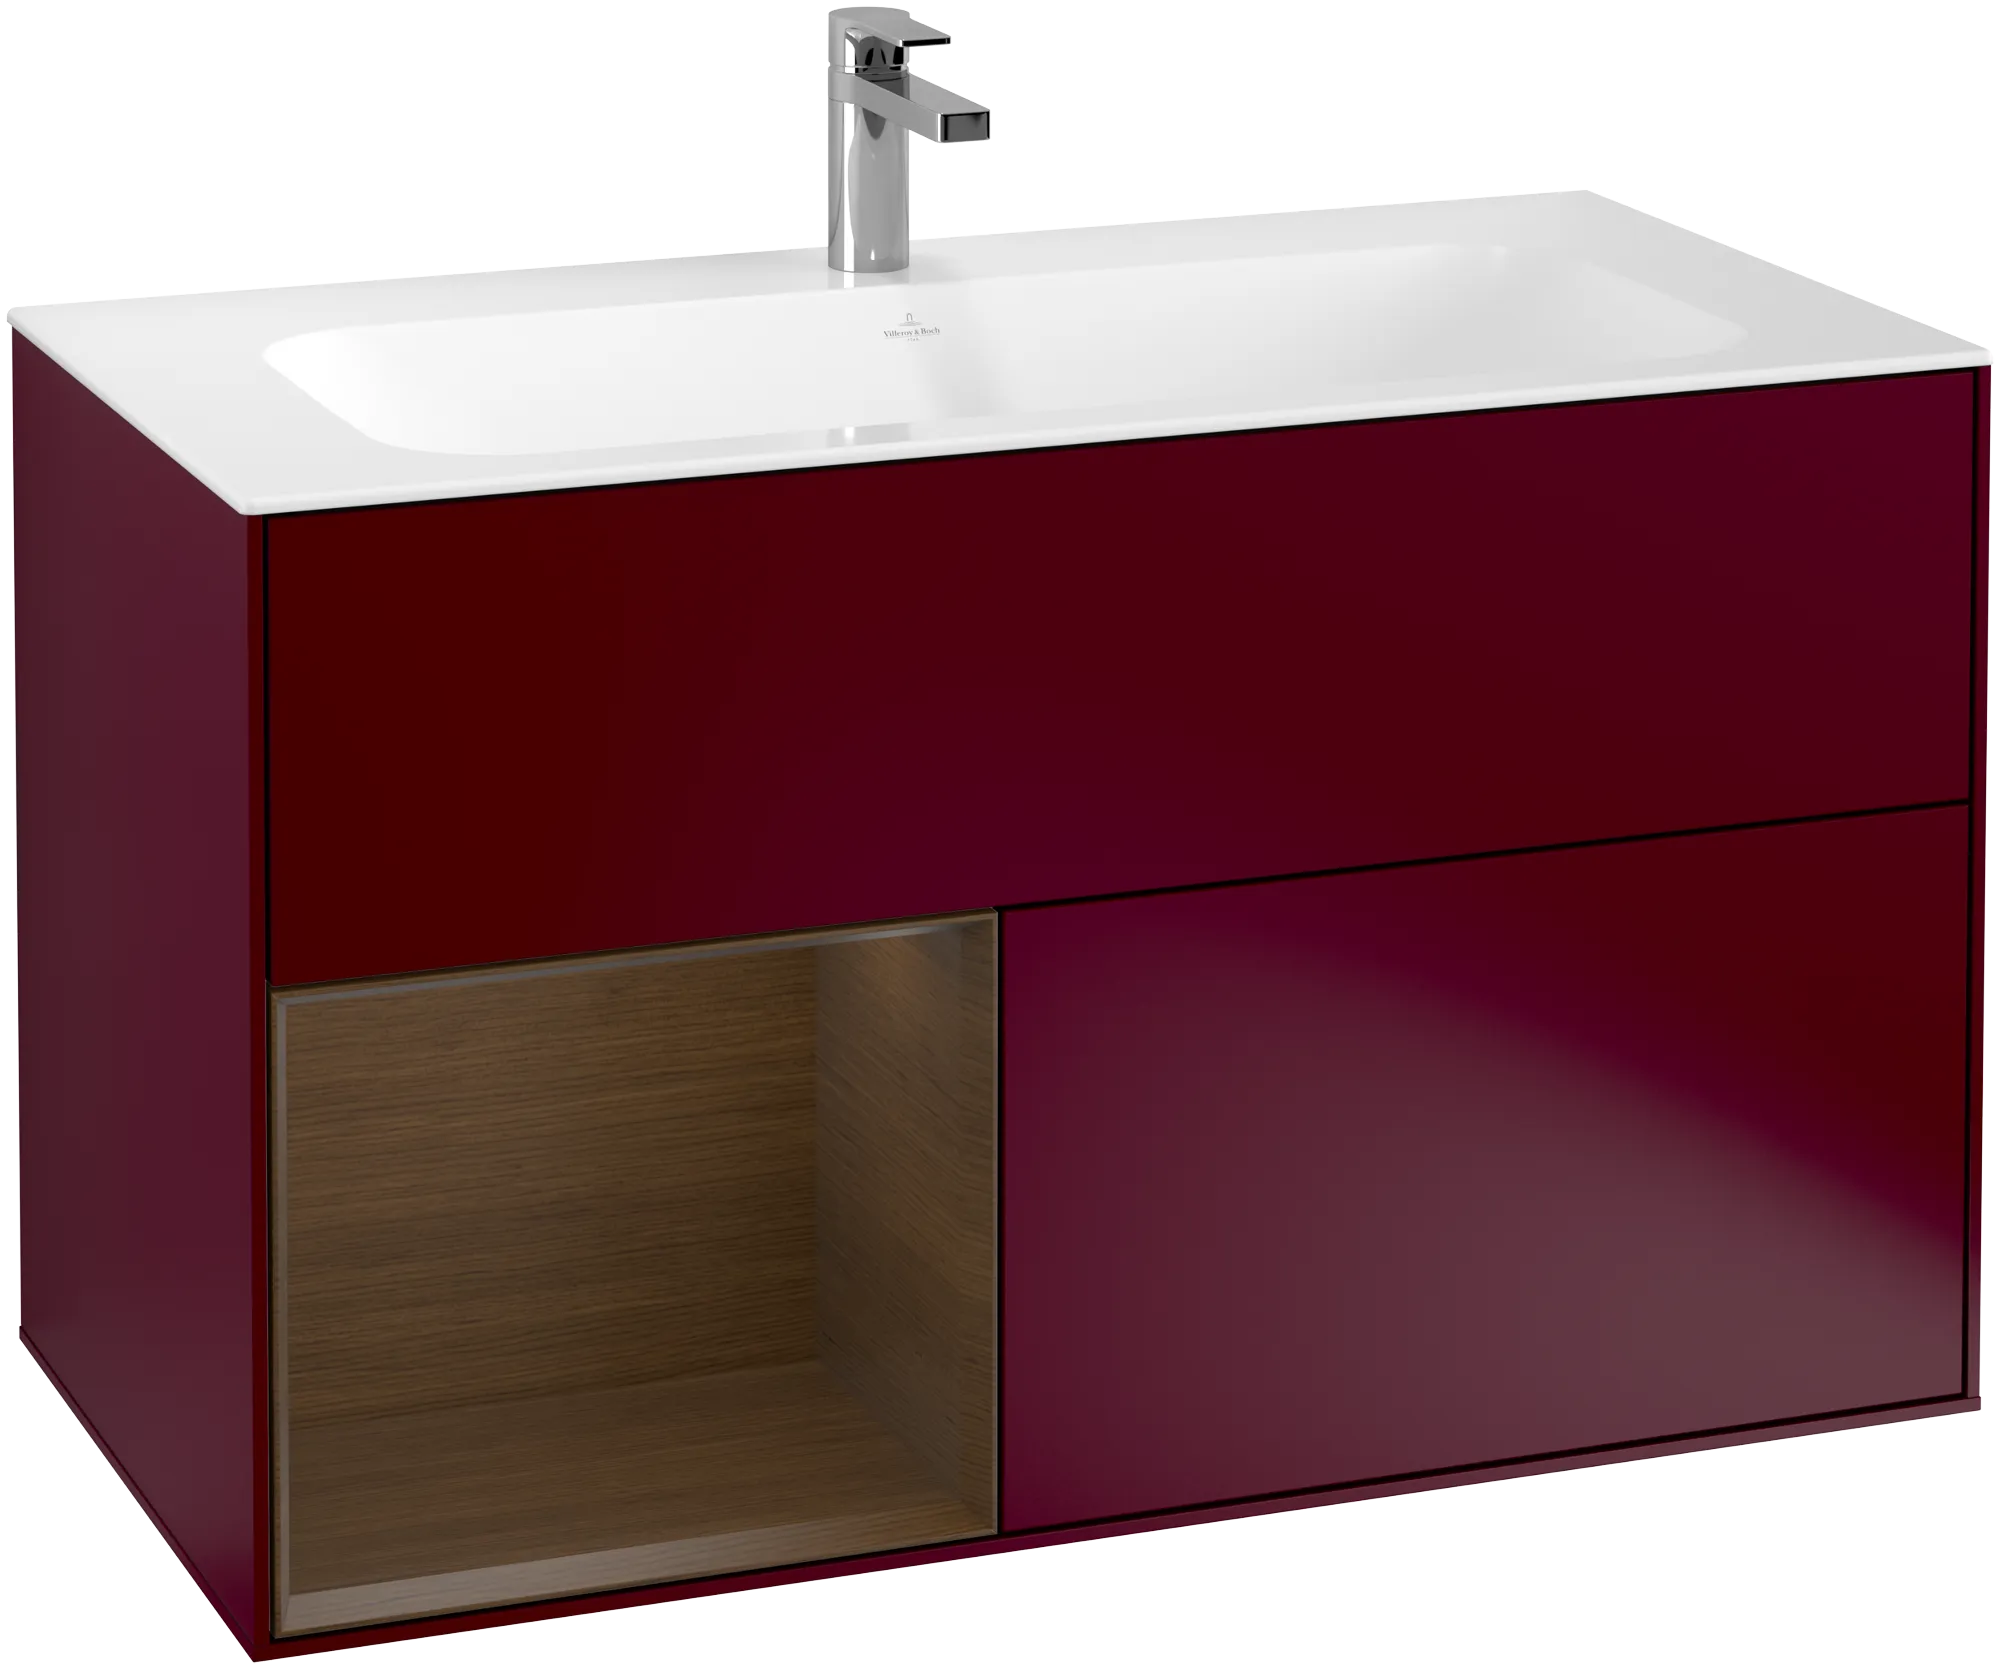 Picture of VILLEROY BOCH Finion Vanity unit, with lighting, 2 pull-out compartments, 996 x 591 x 498 mm, Peony Matt Lacquer / Walnut Veneer #G030GNHB